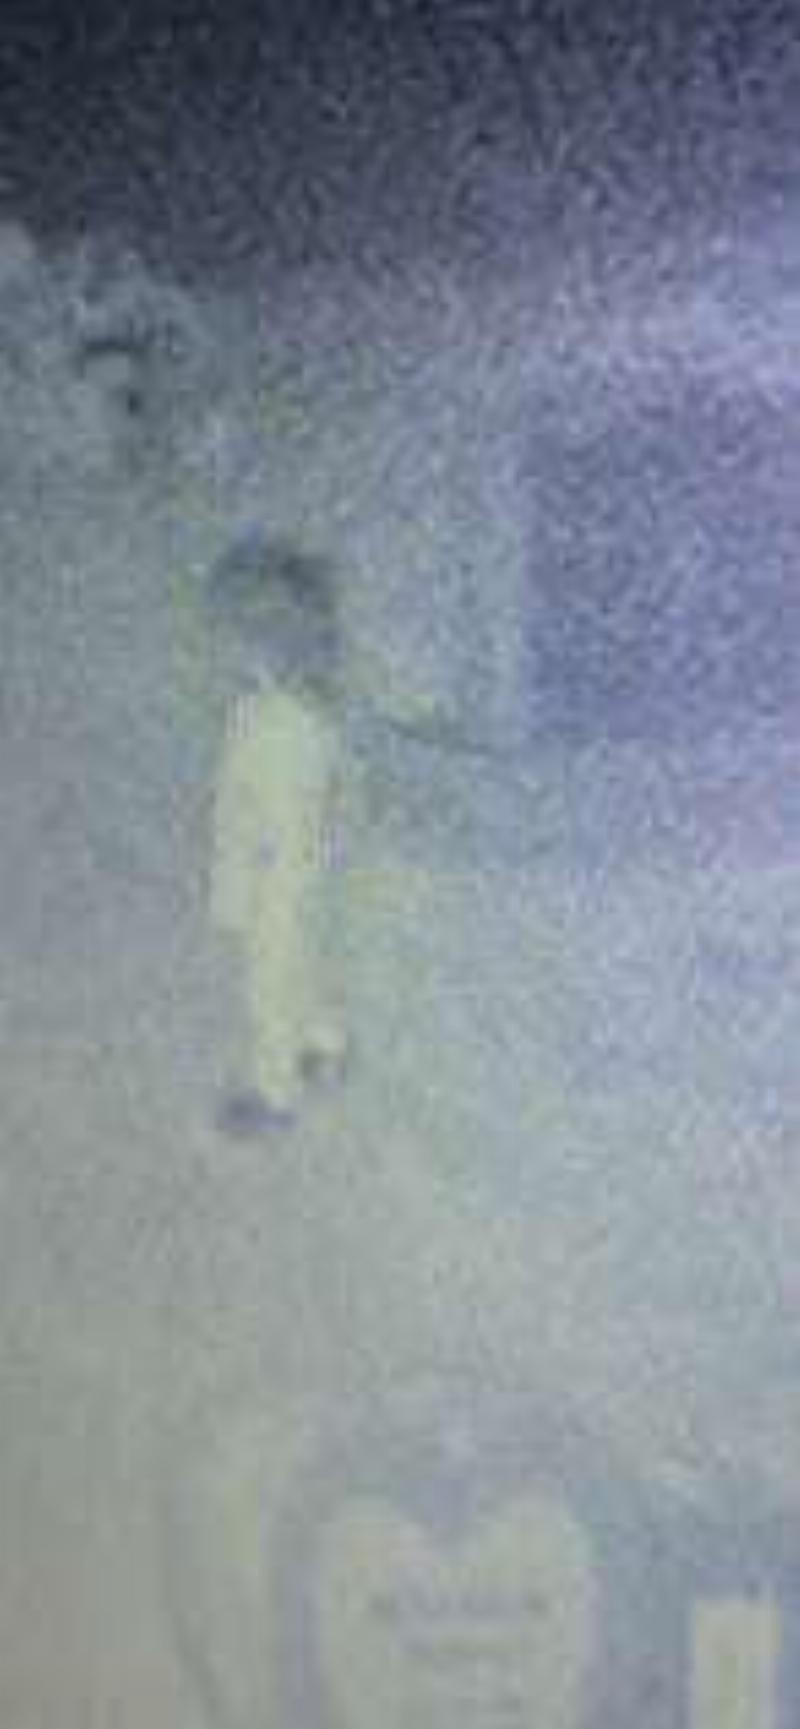 ghost of child figure standing in the graveyard